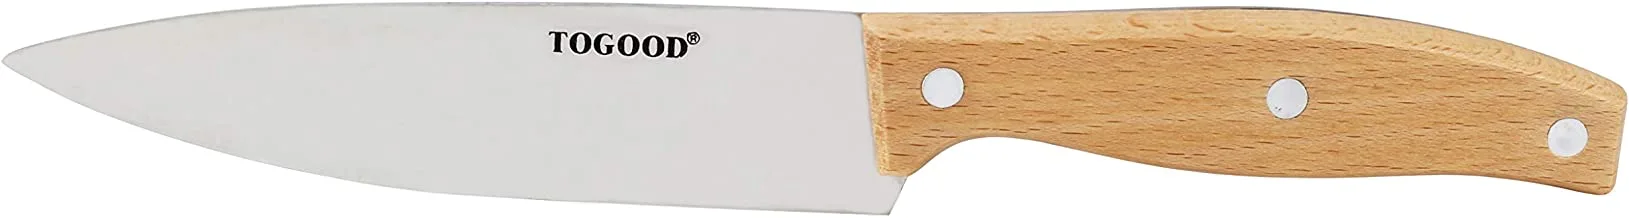 Berger Stainless Steel 6Inch Wooden Chef Knife With Wooden Handle, Bd-Wdkv-10